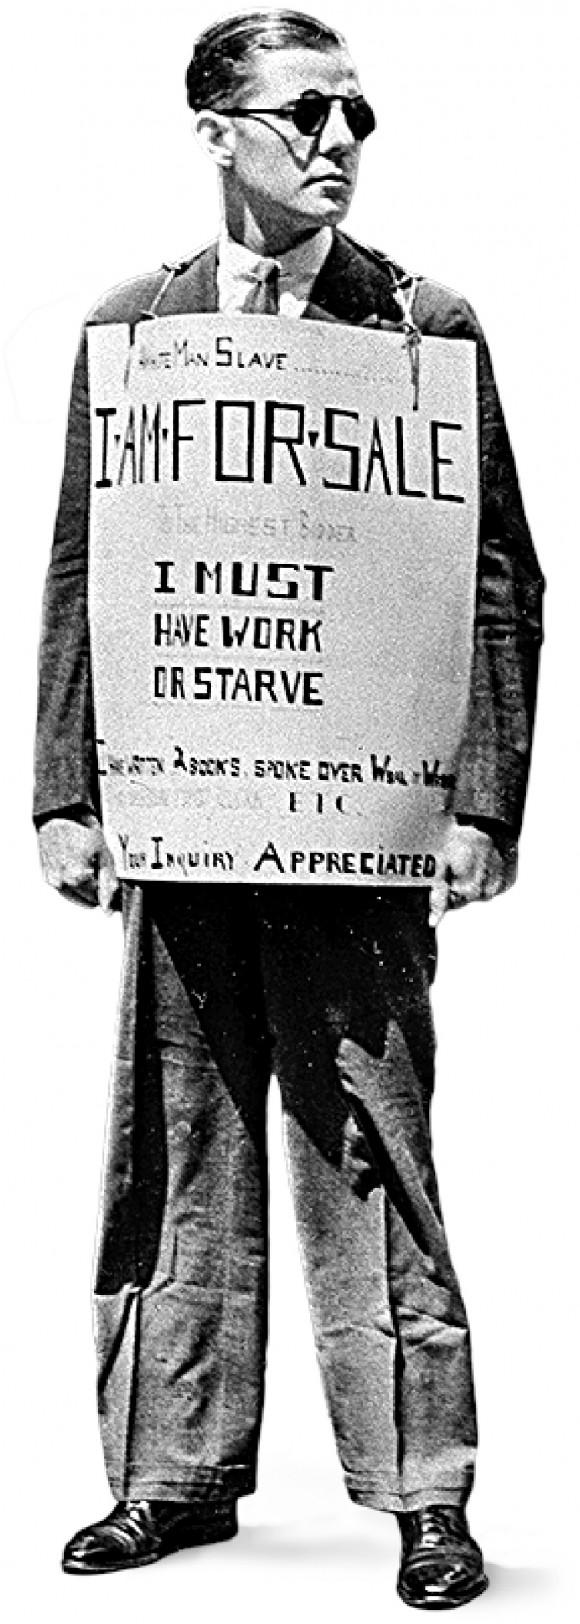 Robley D. Stevens, 30, who lost his job during the Great Depression, wears a sign that reads "I am for sale. I must have work or starve," while standing on a sidewalk in Baltimore in August 1931. Bankruptcy and unemployment forced individuals to take desperate measures at the time. (AP photo)